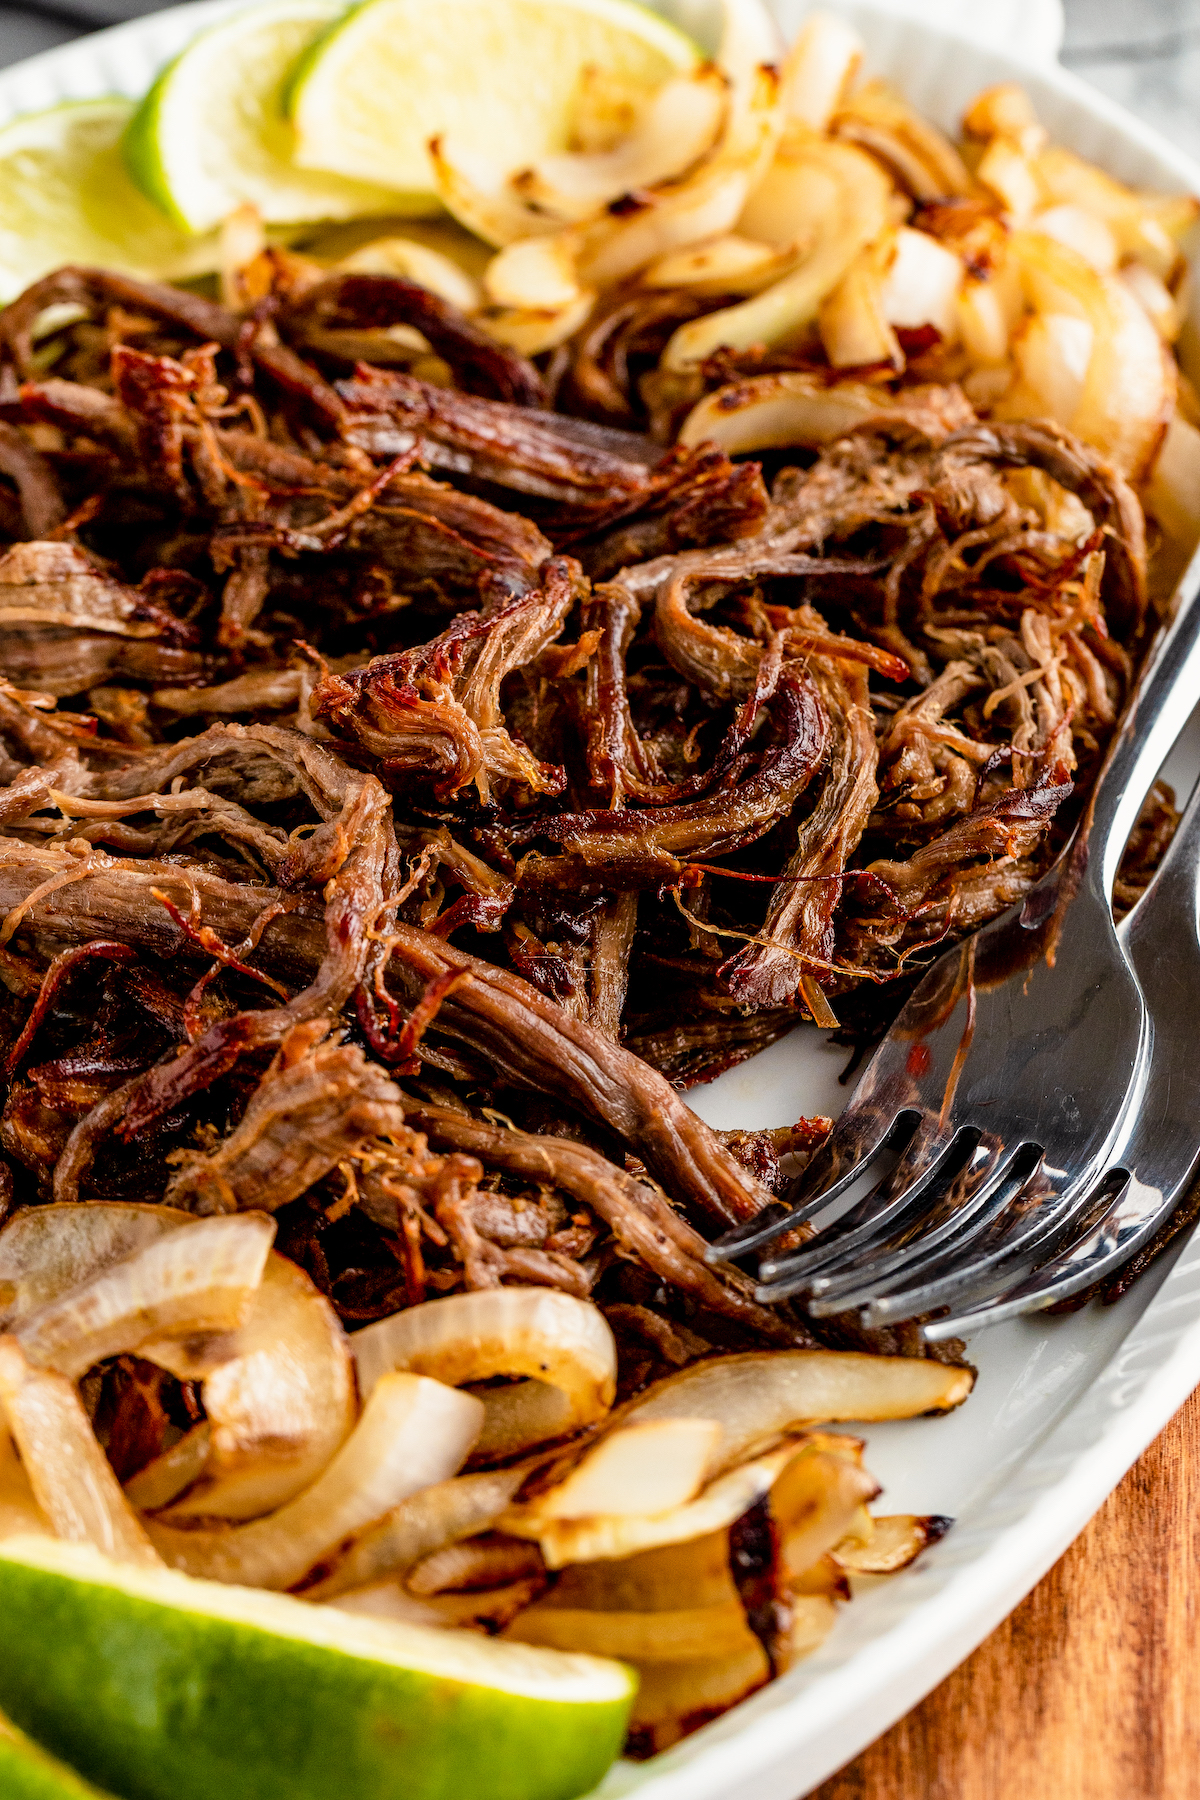 Shredded crispy beef with onions on a platter with two forks.